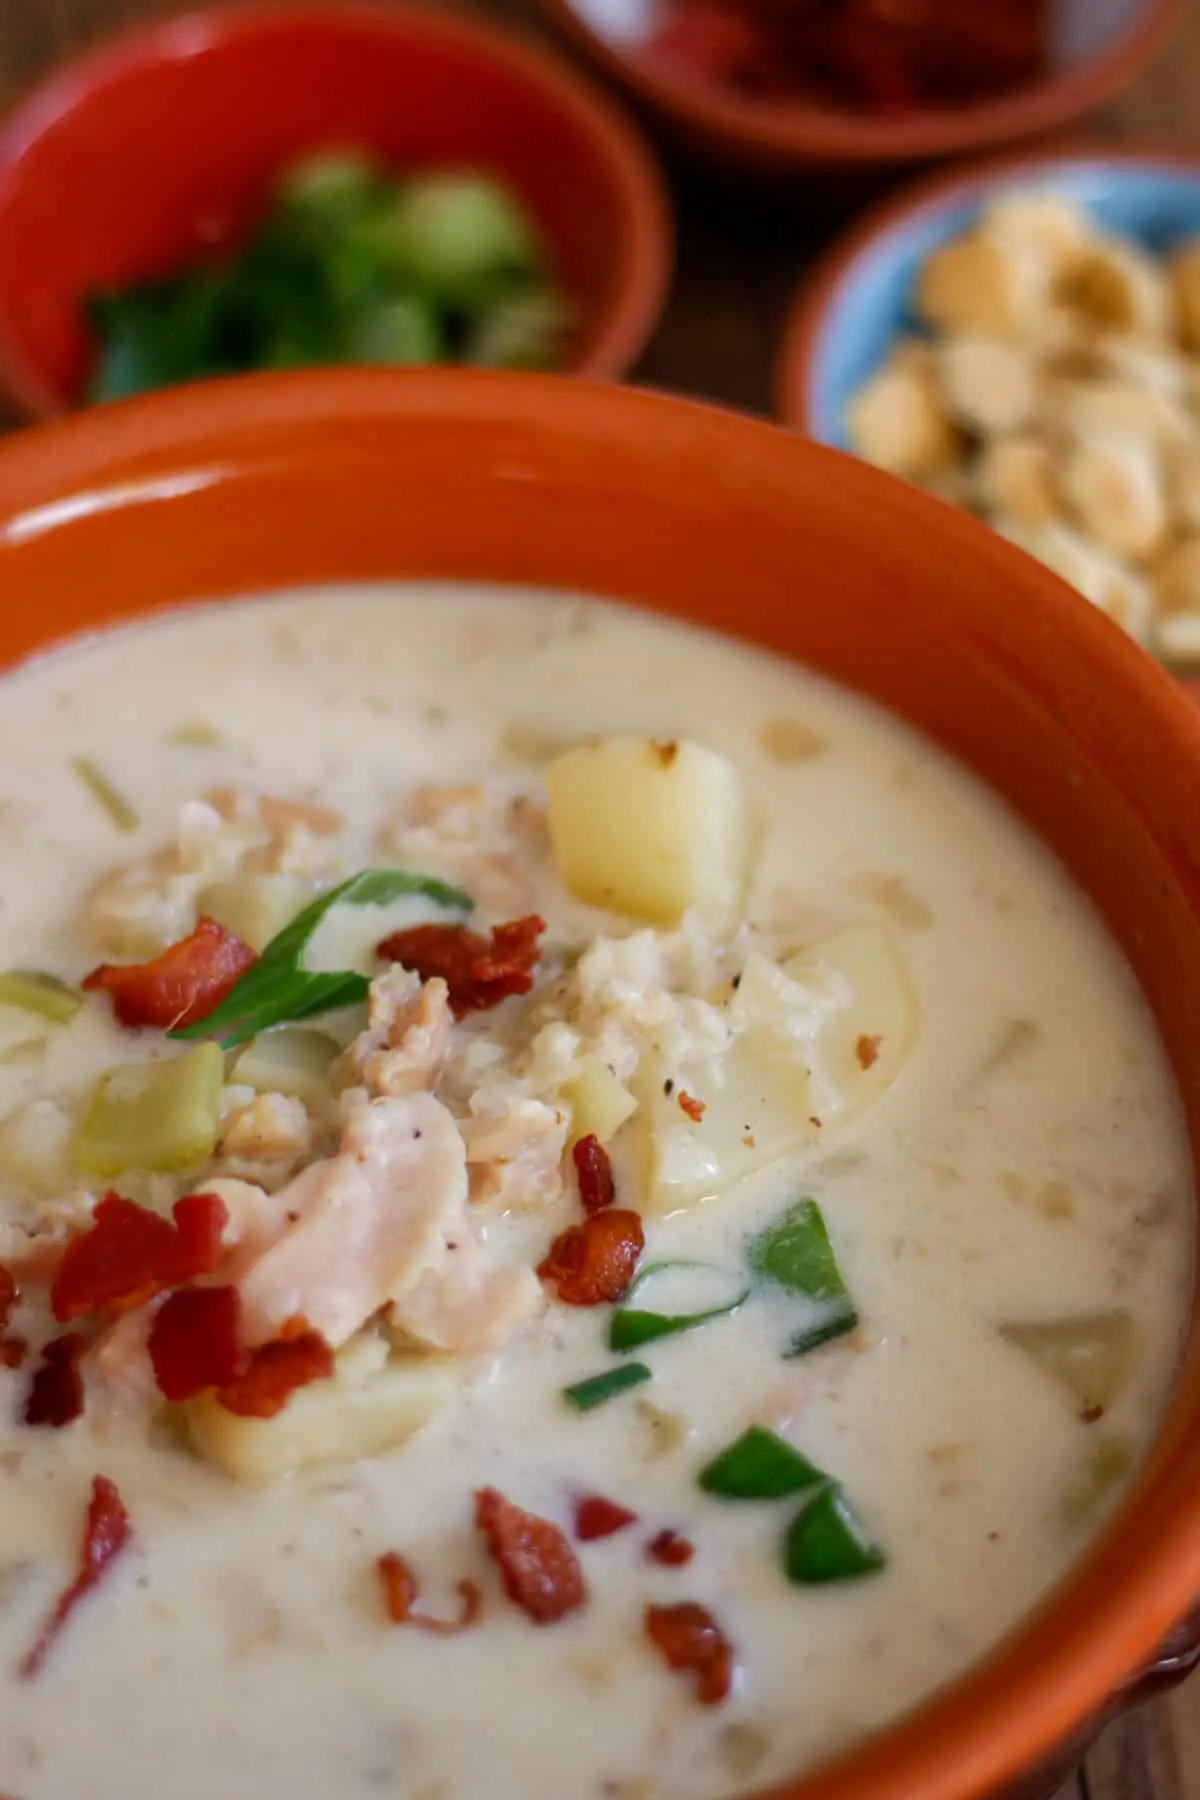 New England Clam Chowder in a terracotta bowl garnished with bacon and green onions. There are bowls containing green onions, oyster crackers, and bacon bits in the background.